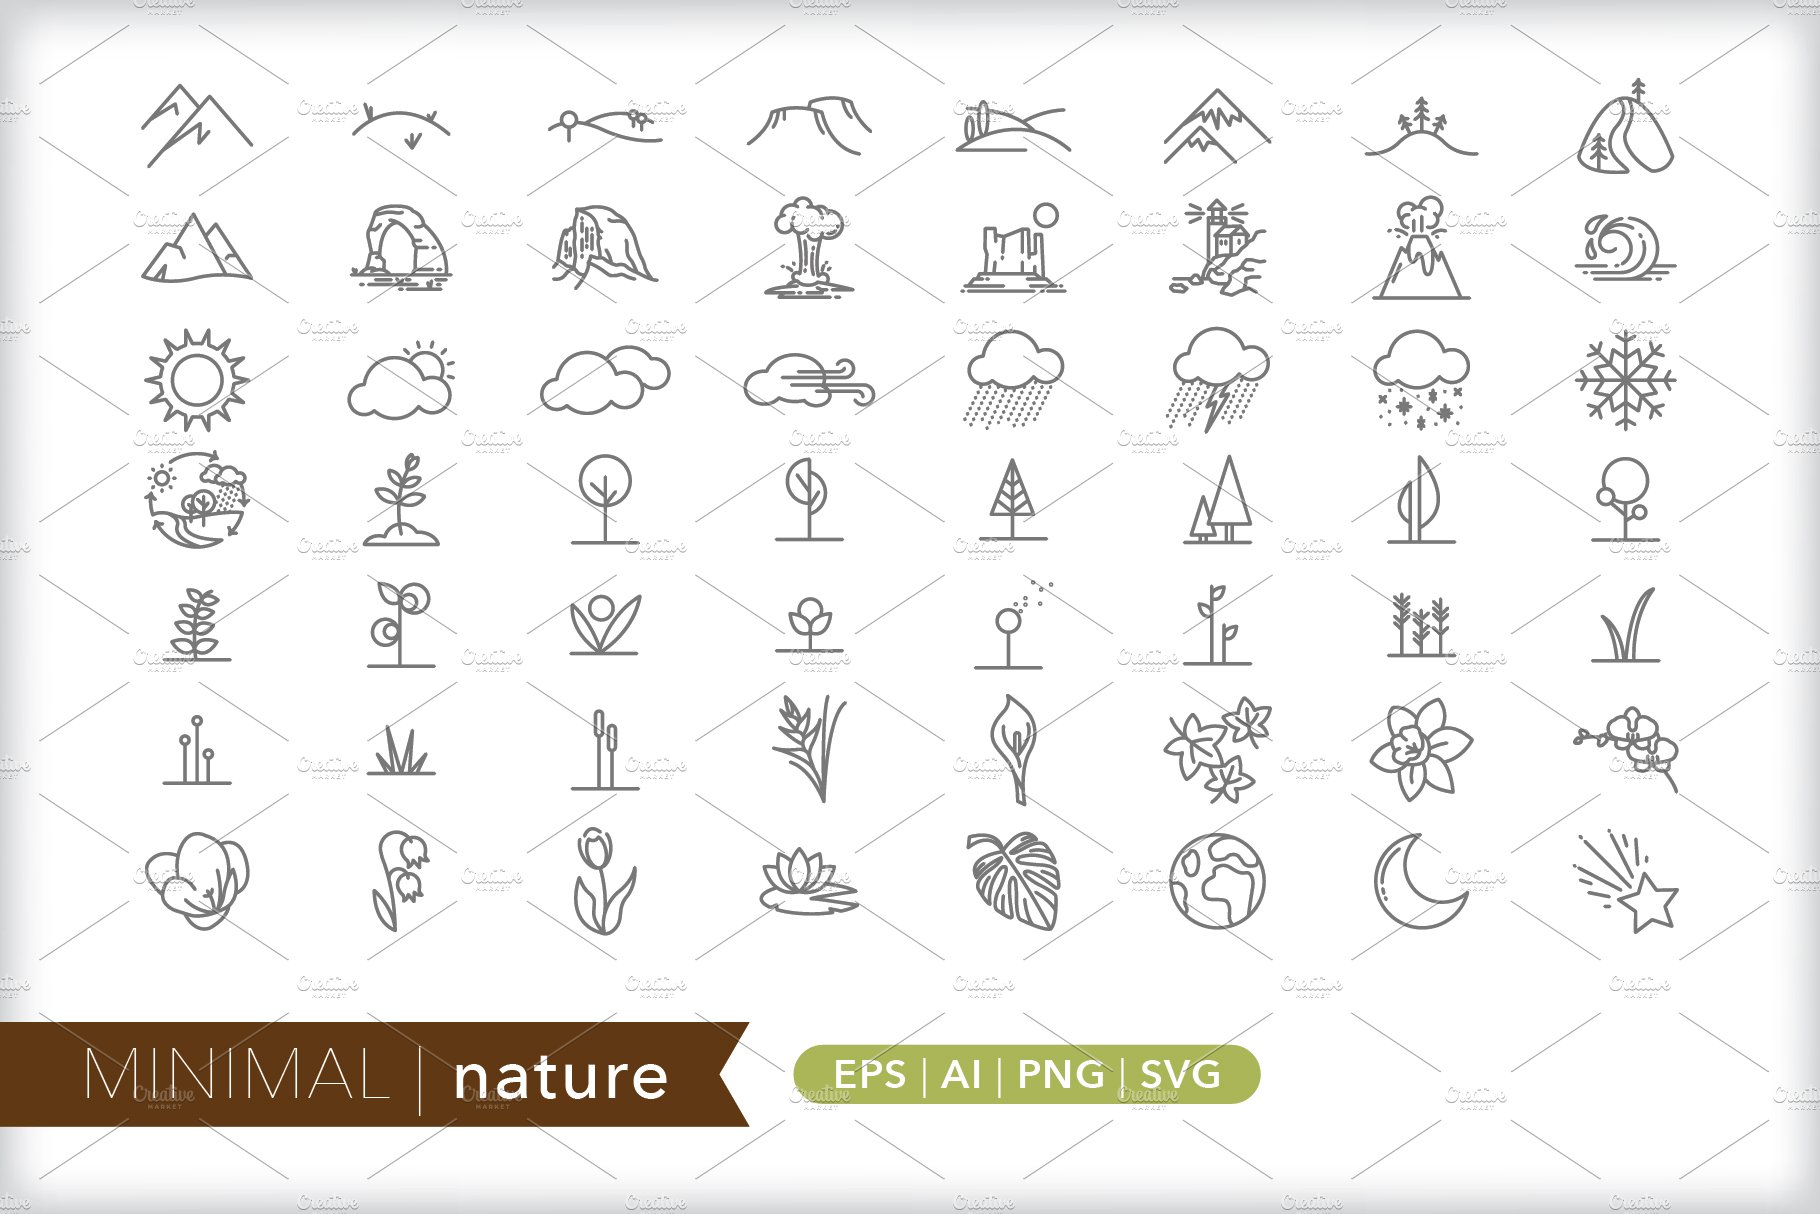 Minimal nature icons cover image.